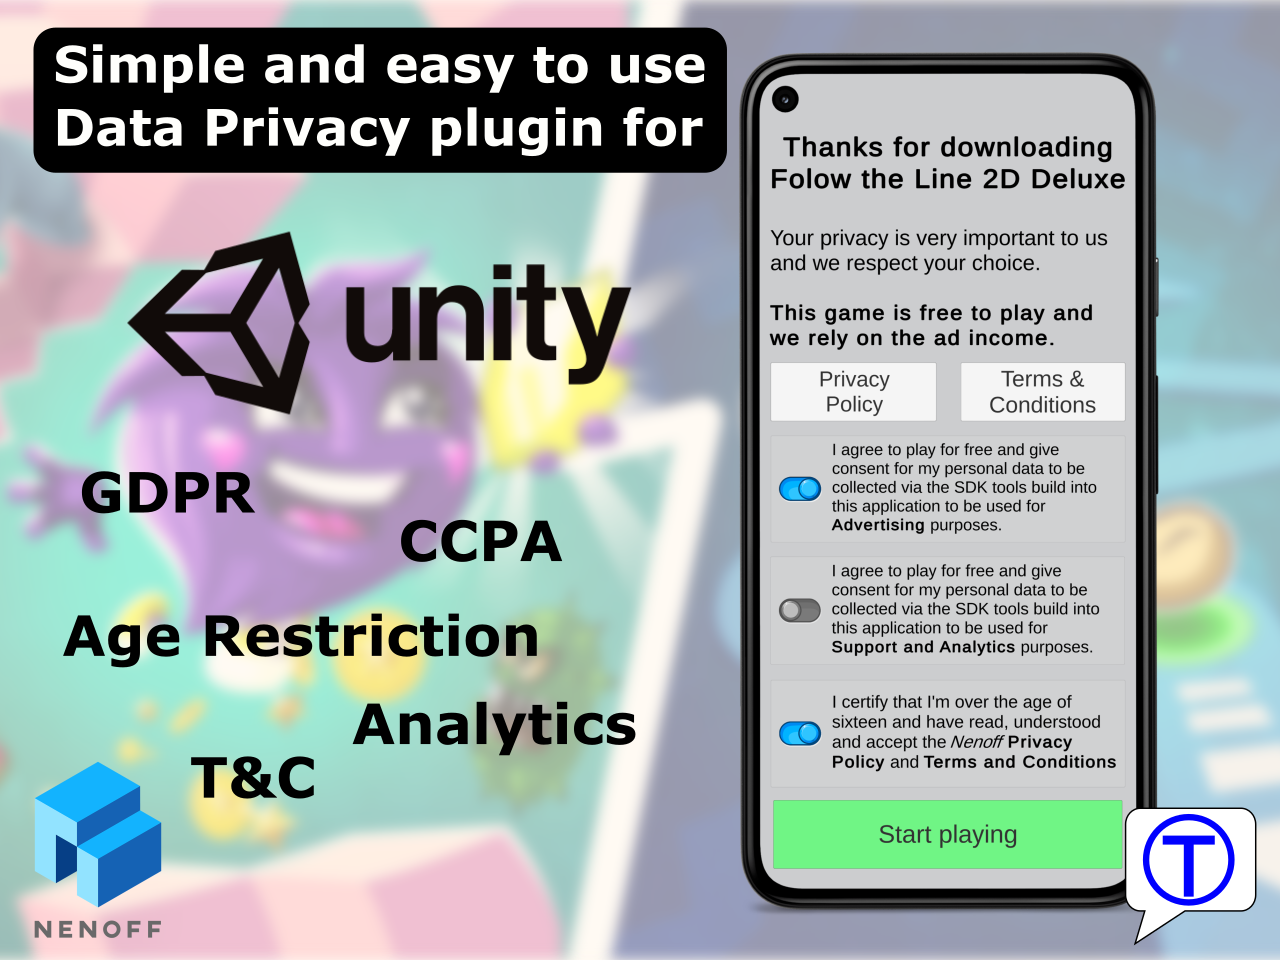 Easy to use Data Privacy plugin for Unity 3D